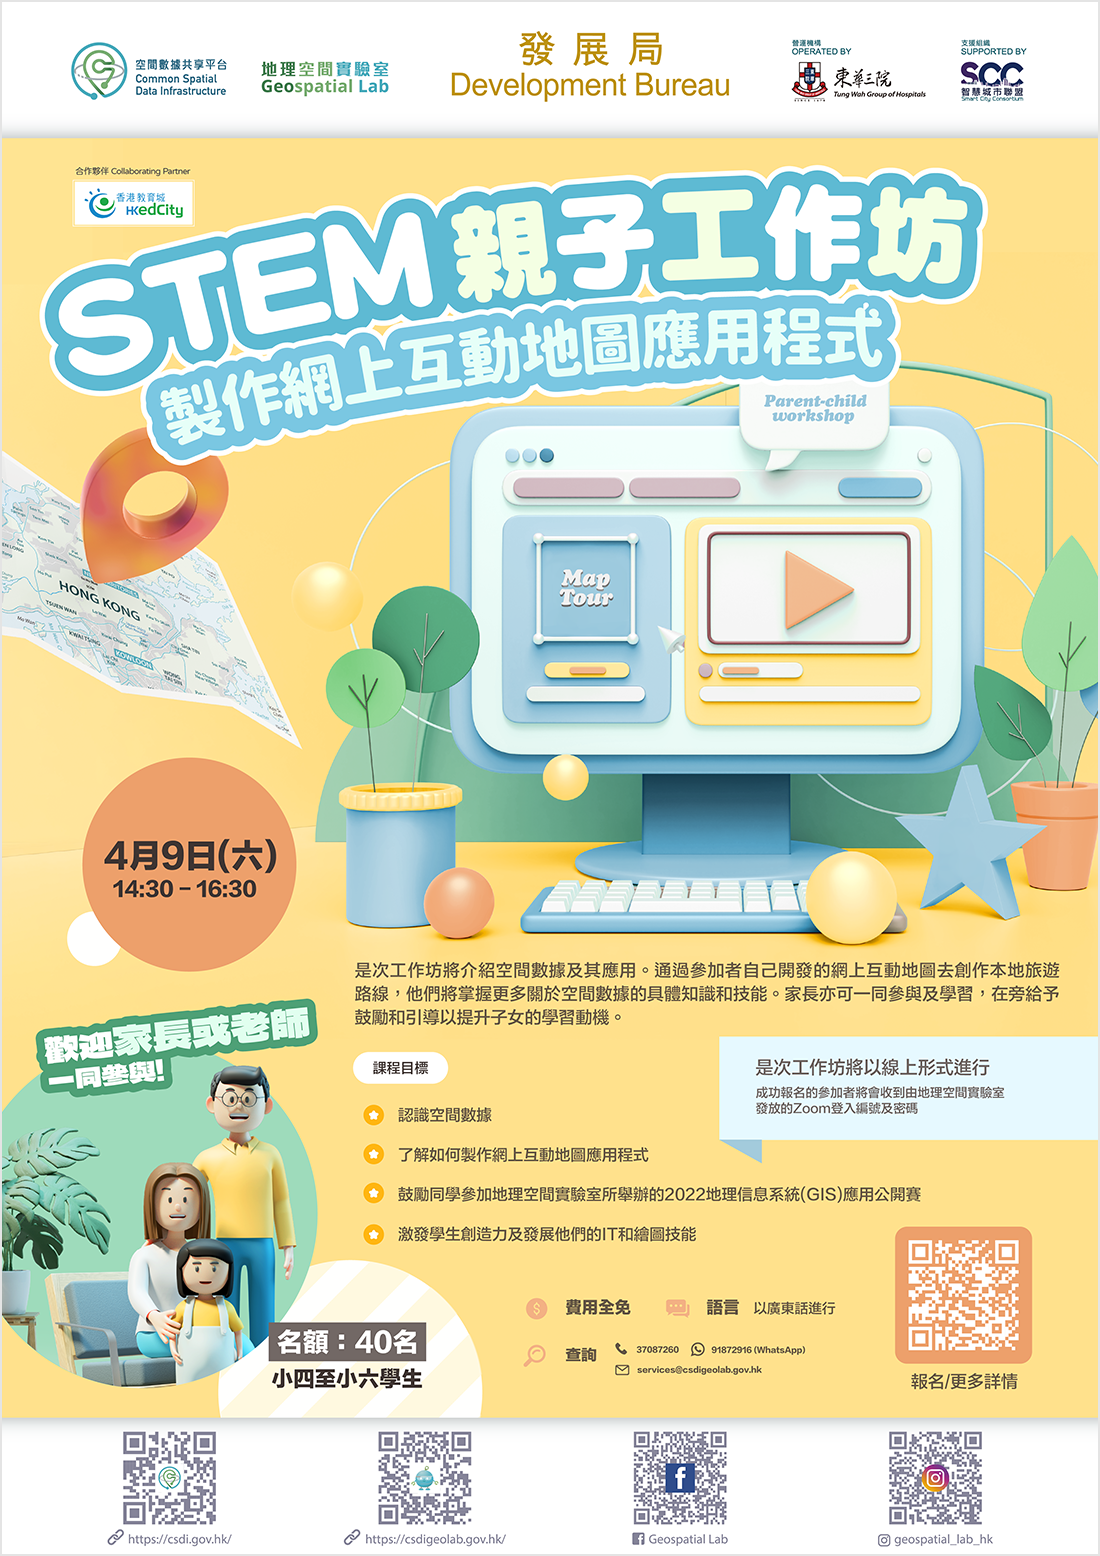 Poster of STEM Parent-child Workshop - Create an Interactive Web Mapping Application